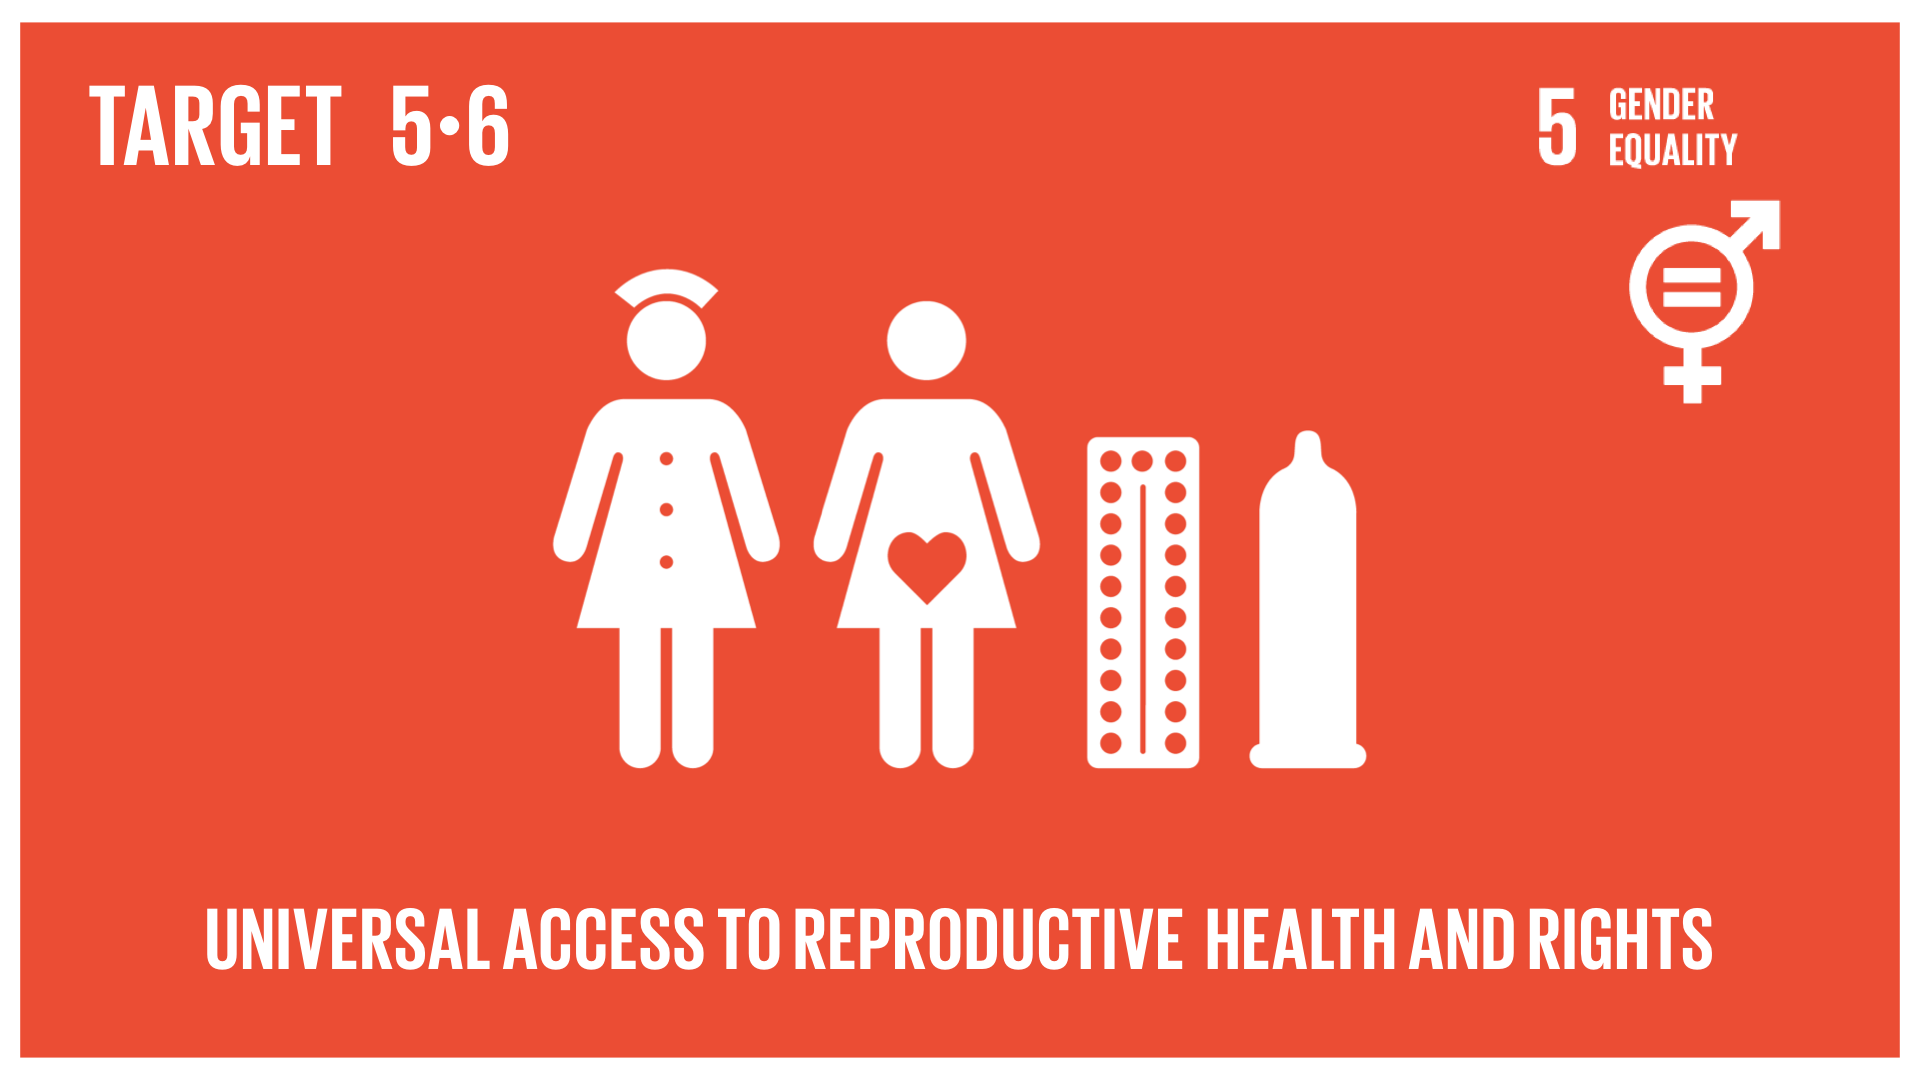 Graphic displaying the universal access to reproductive health and rights 